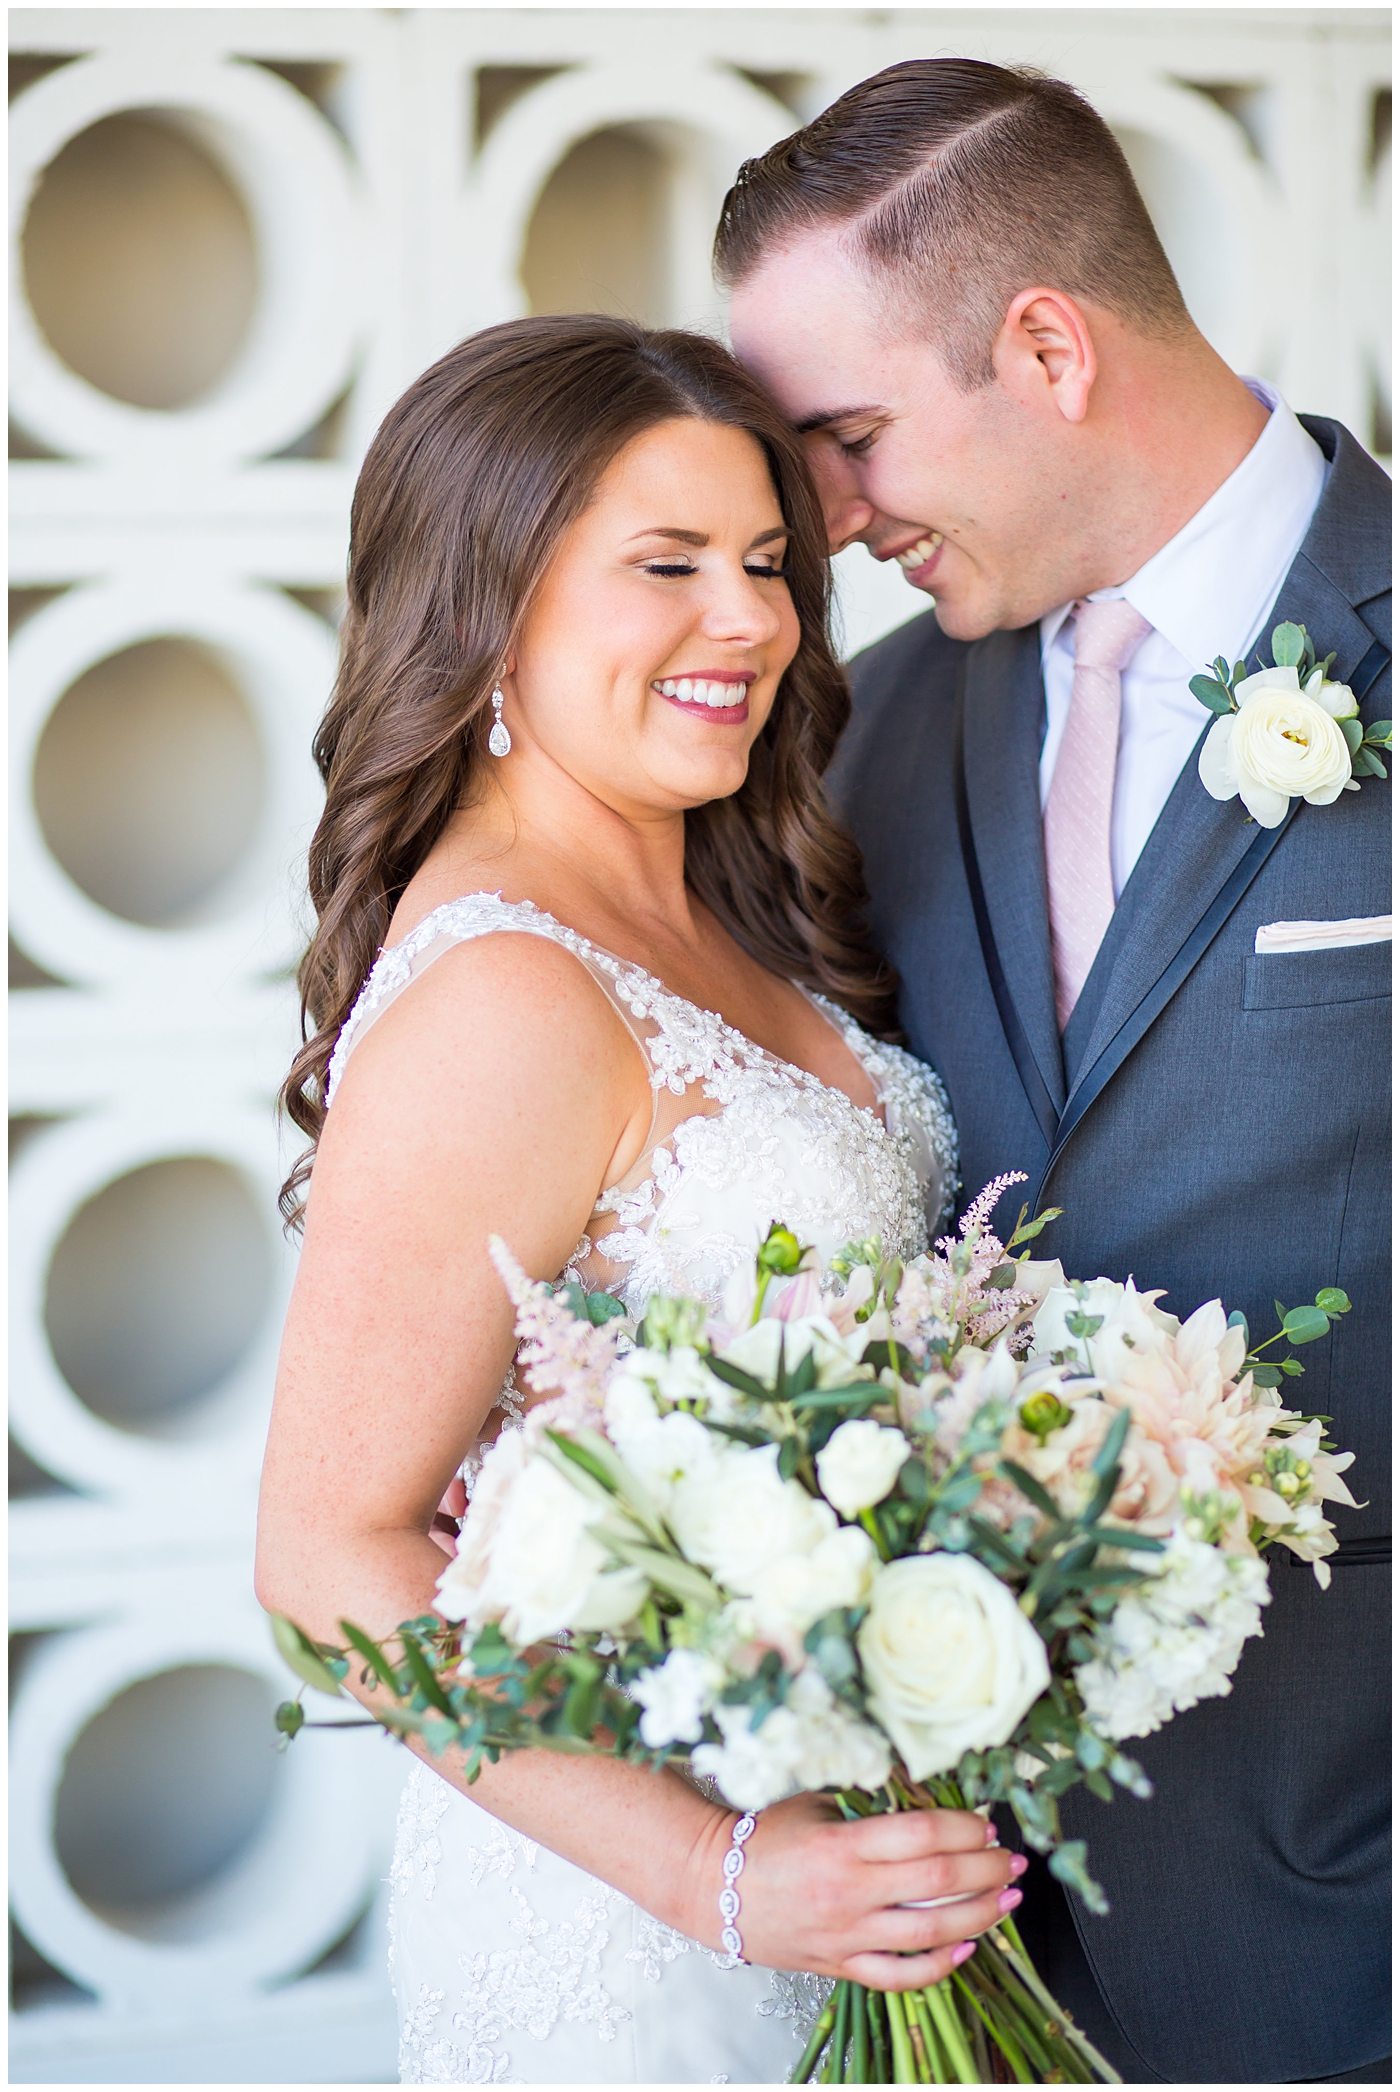 bride in wtoo watters wedding dress with lace straps with wildflower bridal bouquet with soft pink, blush, white, greenery flowers including roses, dahlias, snapdragons with groom in gray suit with pink tie and ranunculus boutonniere wedding day portrait